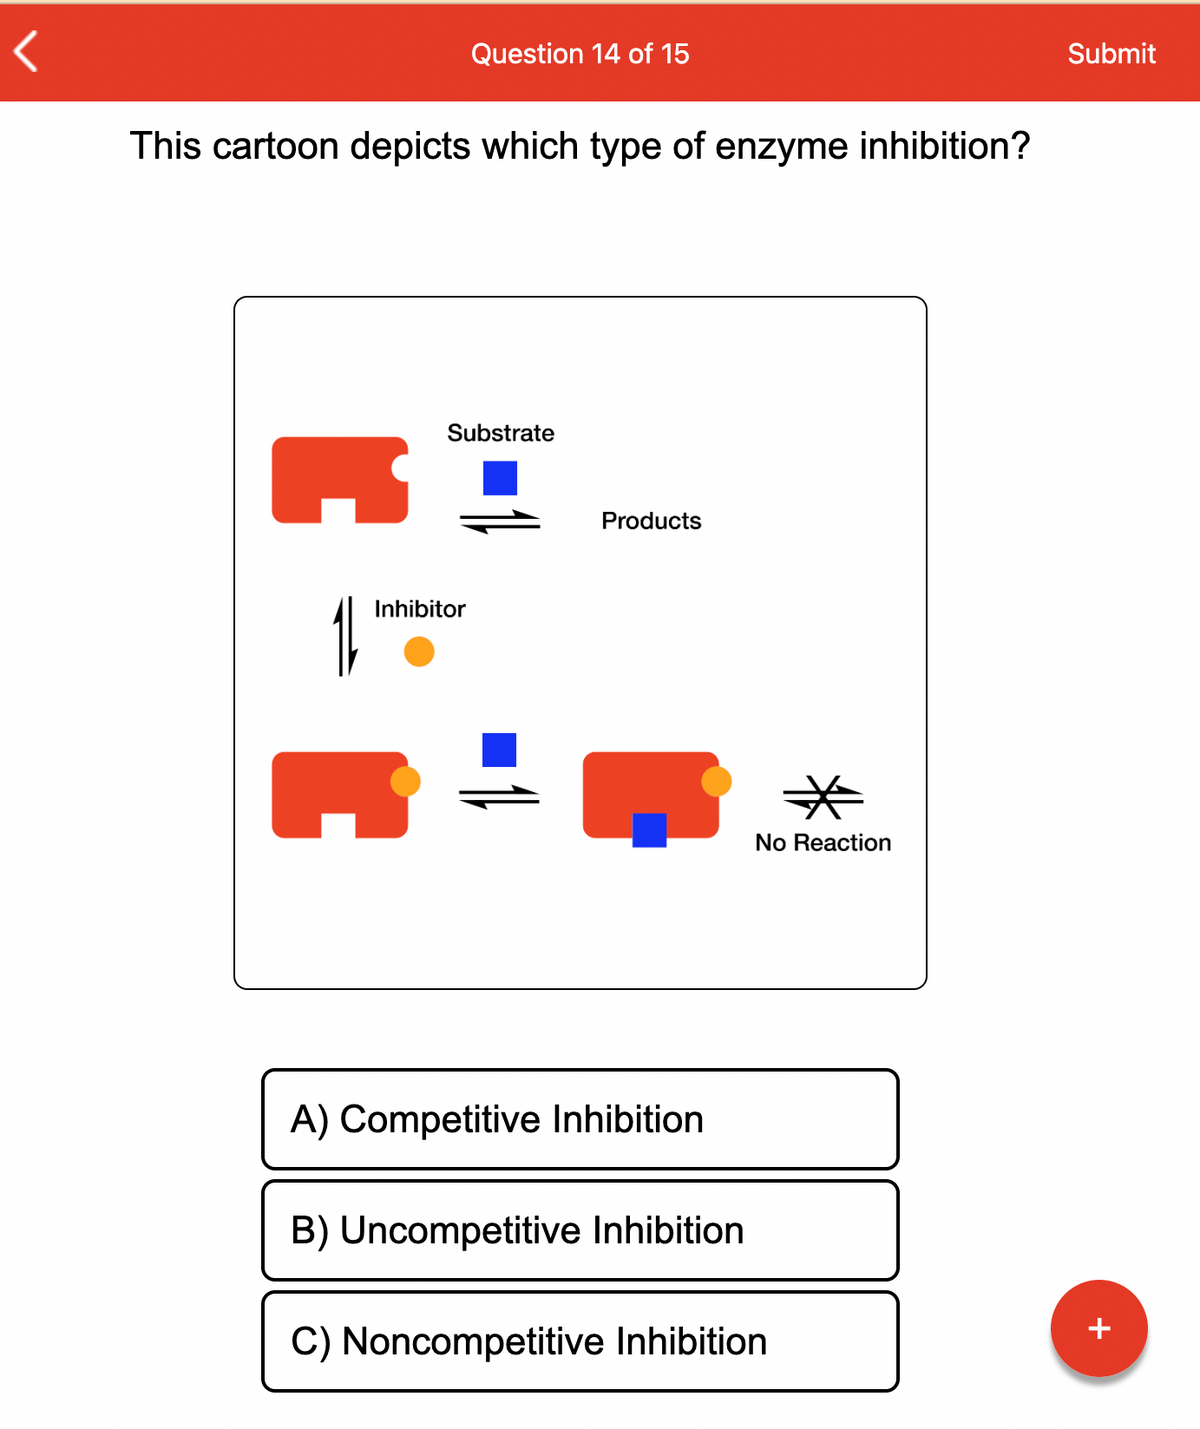 <
This cartoon depicts which type of enzyme inhibition?
R
Question 14 of 15
Substrate
Inhibitor
Products
A) Competitive Inhibition
B) Uncompetitive Inhibition
*
No Reaction
C) Noncompetitive Inhibition
Submit
+